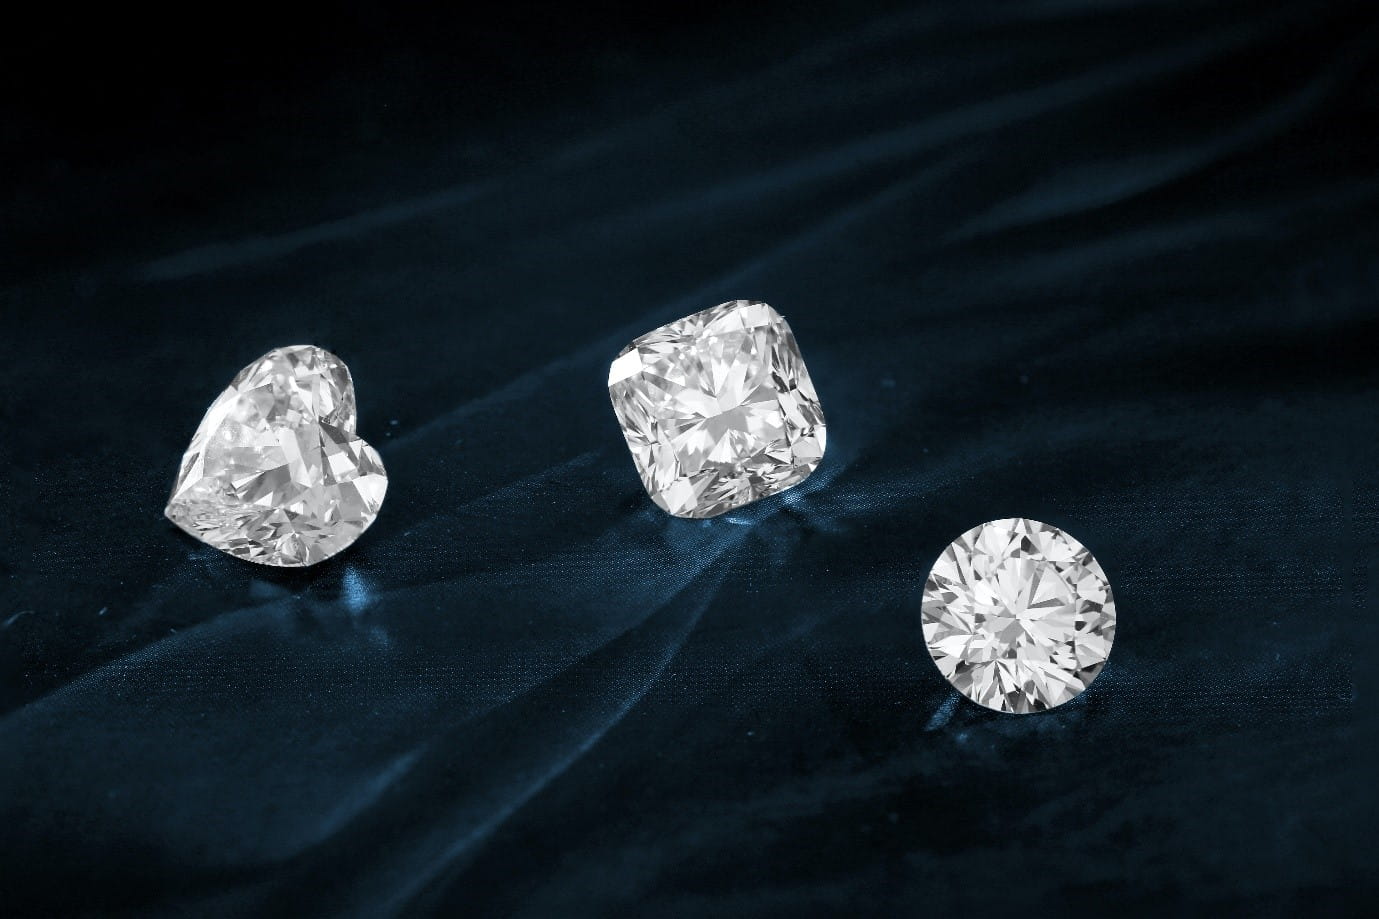 Diamond shapes: what does your diamond say about you?